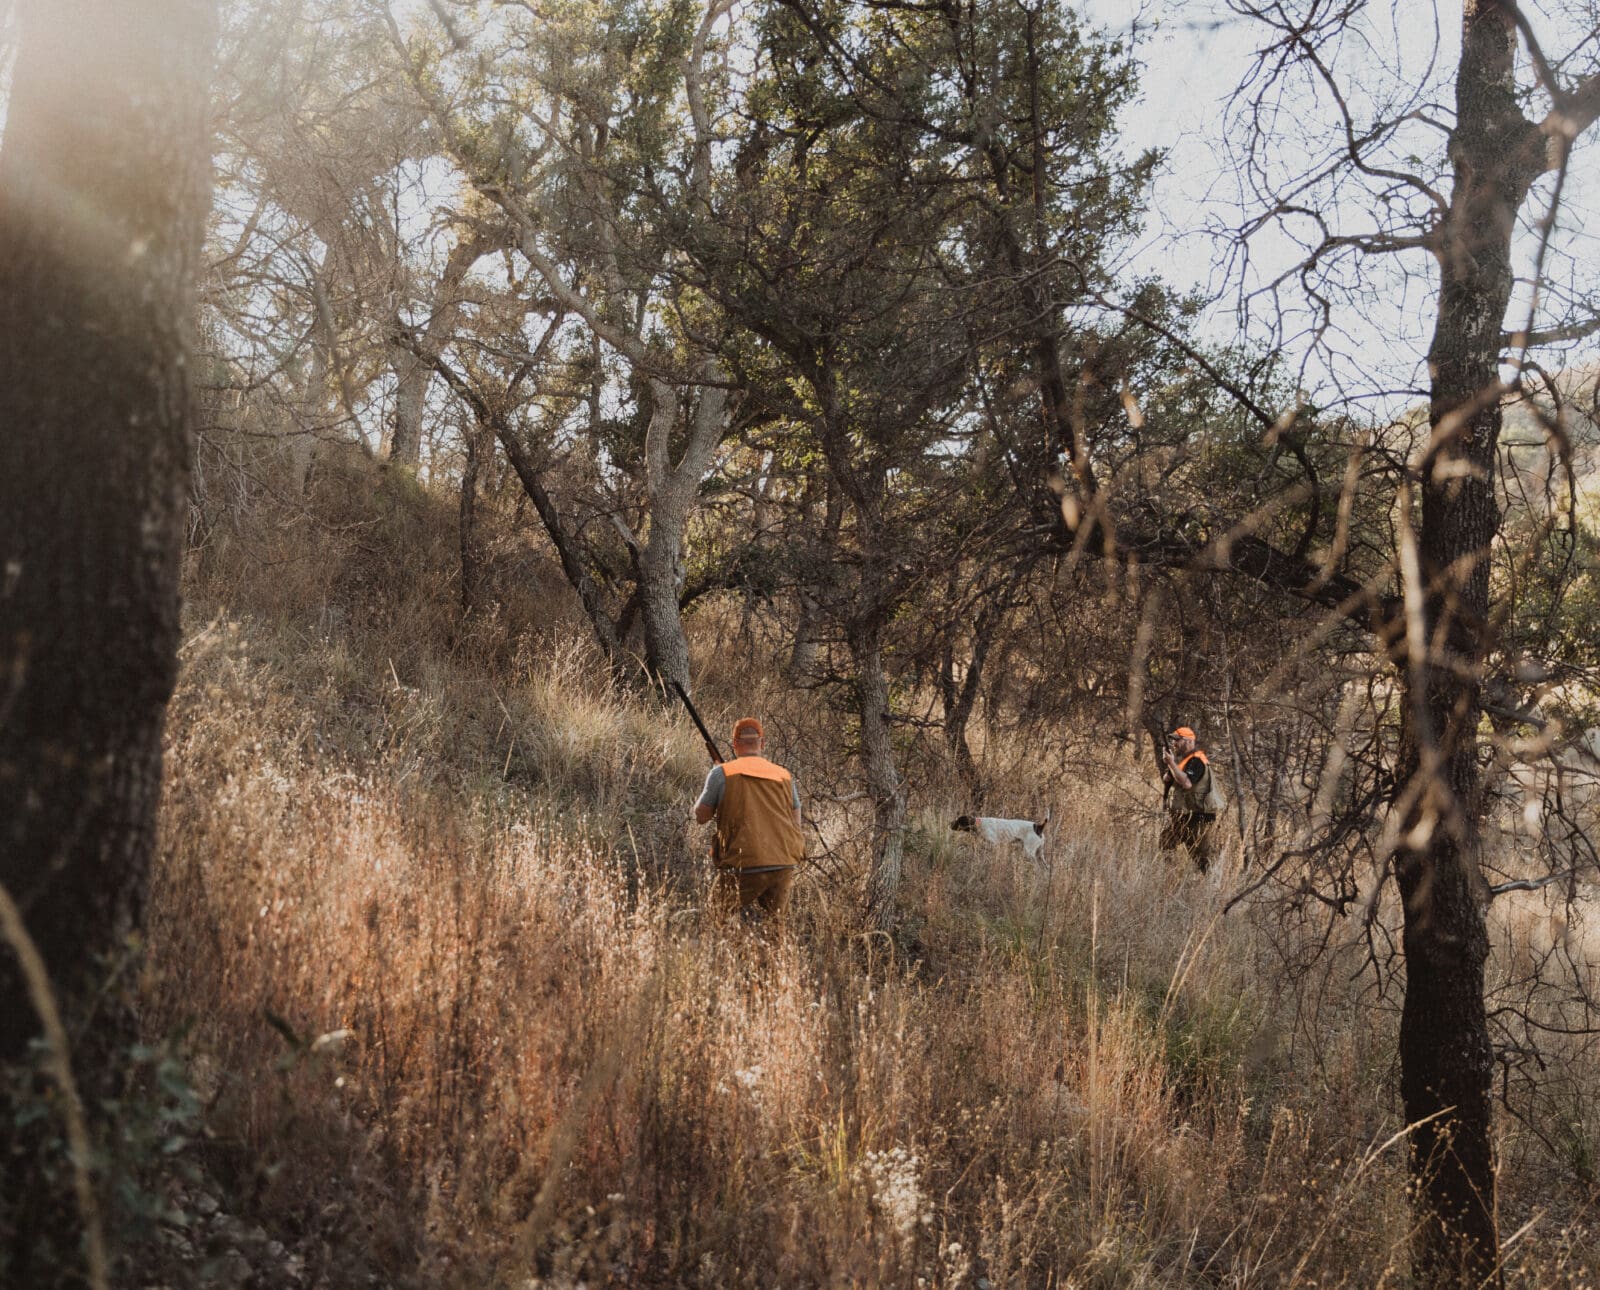 A group of hunters walk in on a bird dog while quail hunting in the United States